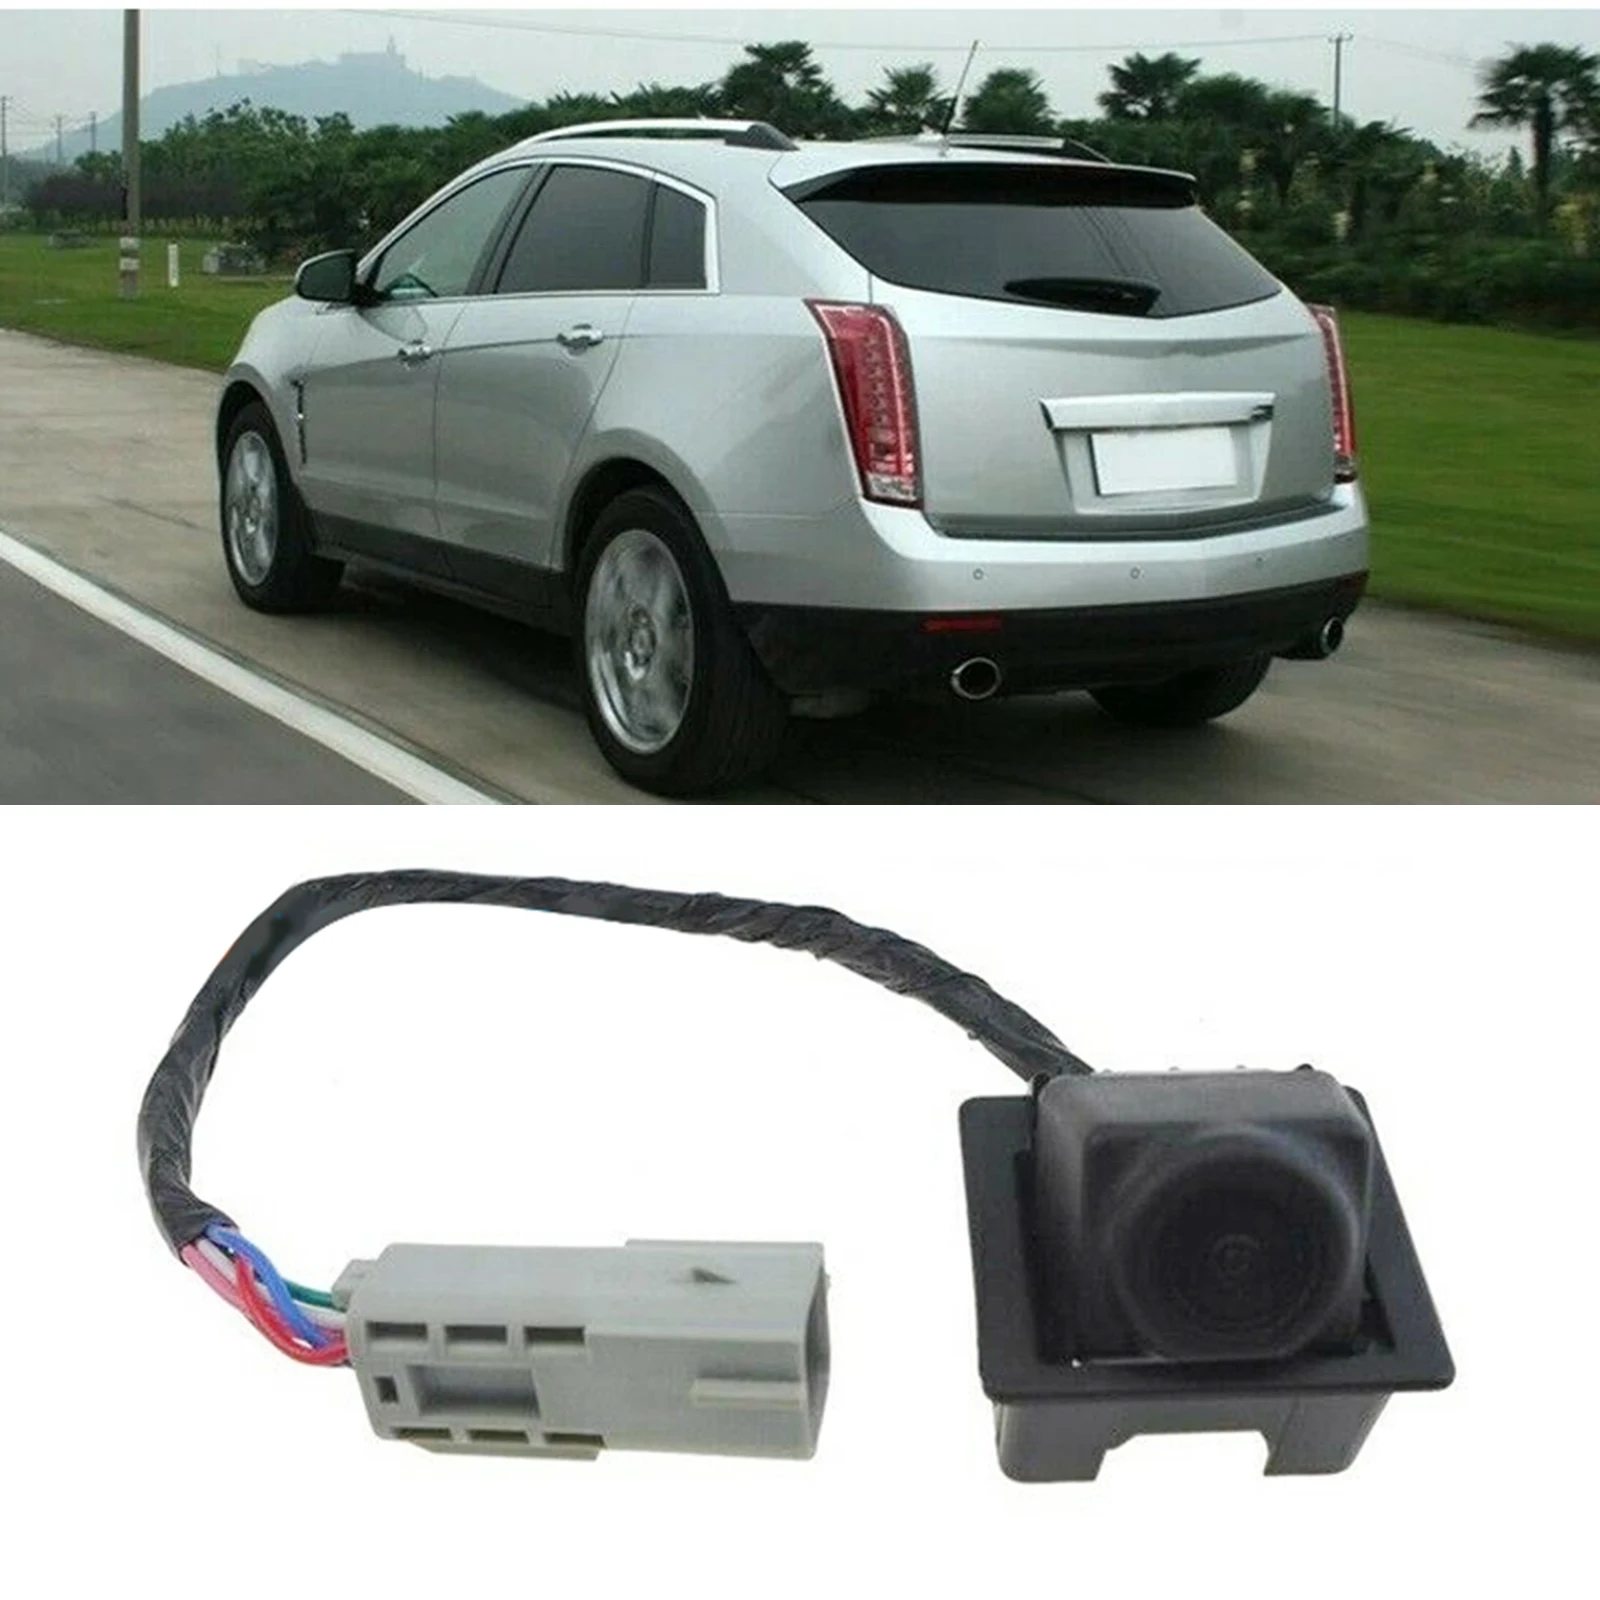 Reverse Back Up Camera for Cadillac SRX 2010 2011 2012 2013 2014 2015 2016 AUTO Accessories Parking Rear View CAM